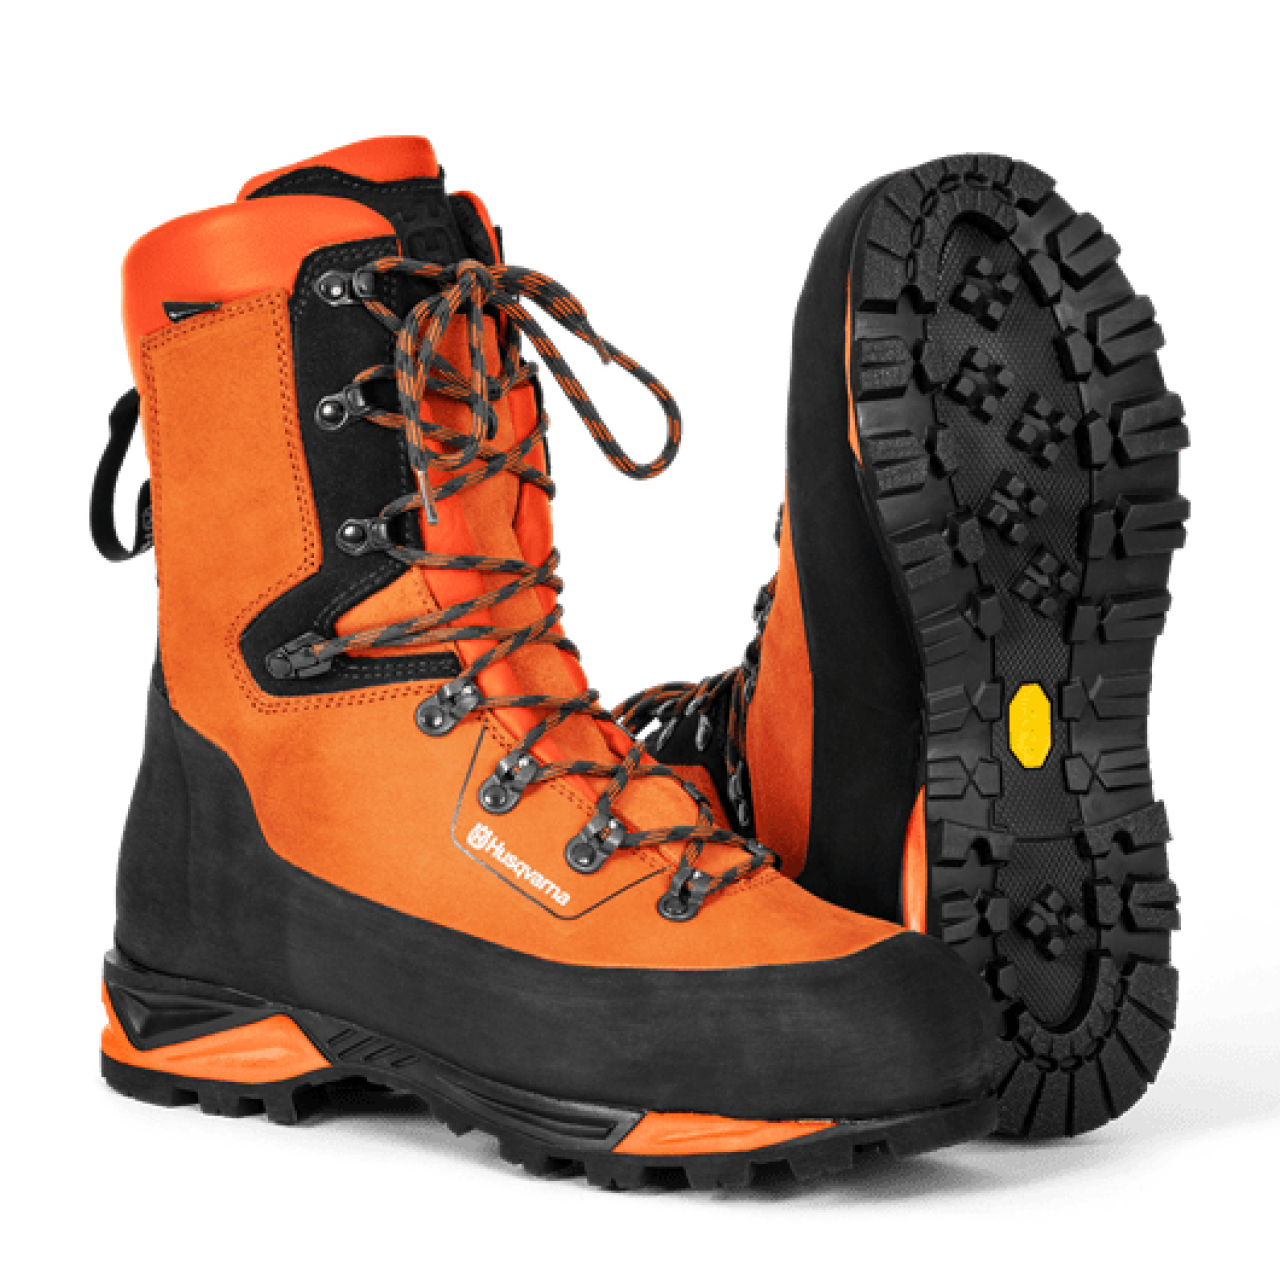 Stiefel Technical 24 Level 2 Gr. 36